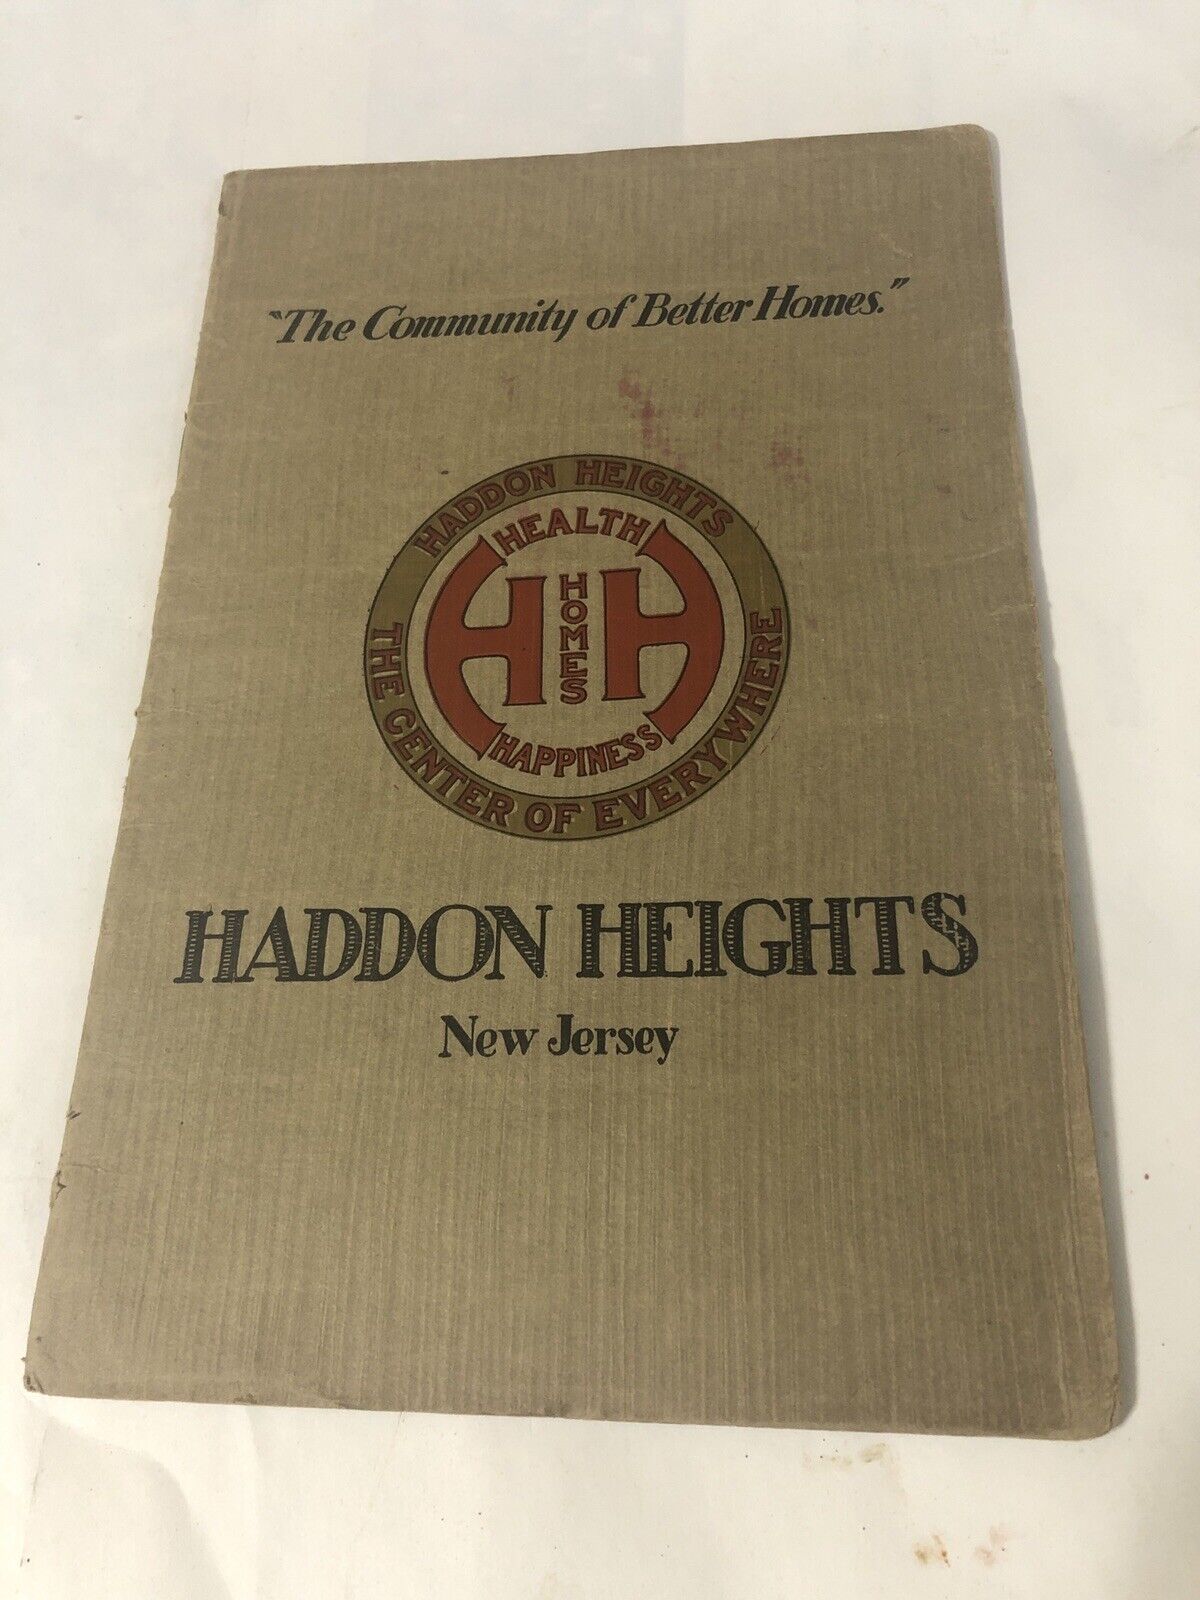 Vintage Haddon Heights New Jersey Historical Booklet 1920s-30s